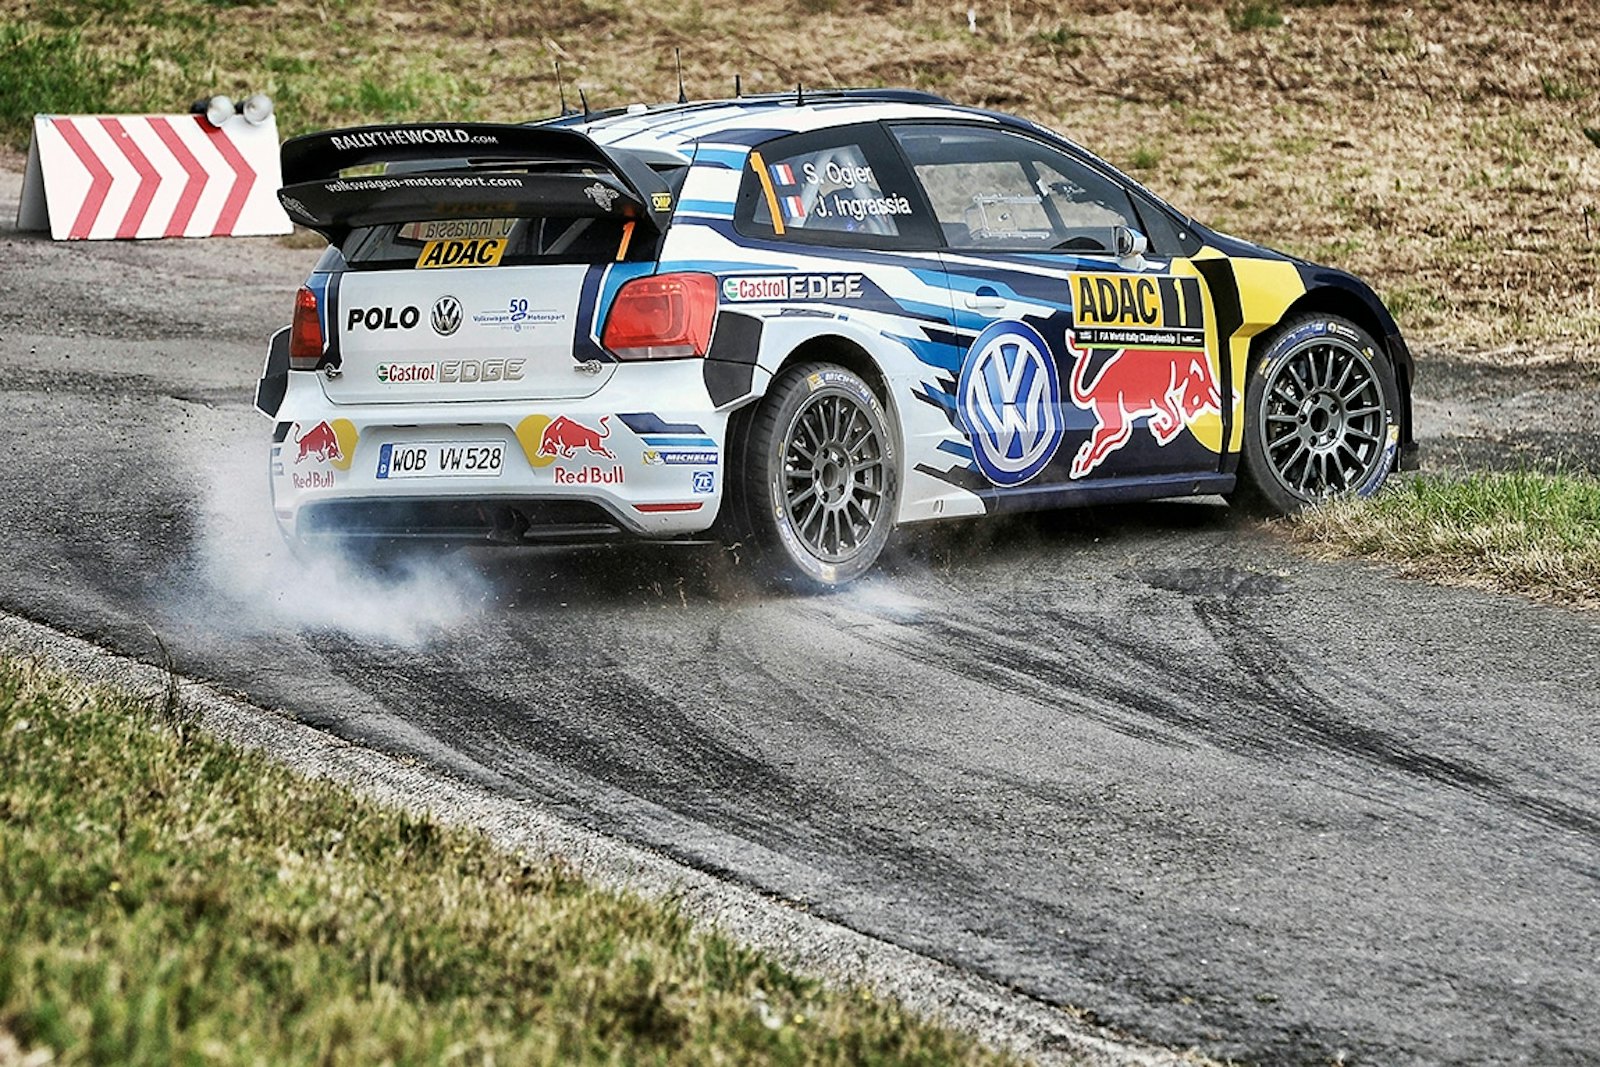 Sebastien Ogier (FR), Julien Ingrassia (FR) performs during FIA World Rally Championship 2016 Germany in Trier, Germany on August 18, 2016   // @World / Red Bull Content Pool // P-20160822-00712 // Usage for editorial use only // Please go to www.redbullcontentpool.com for further information. //